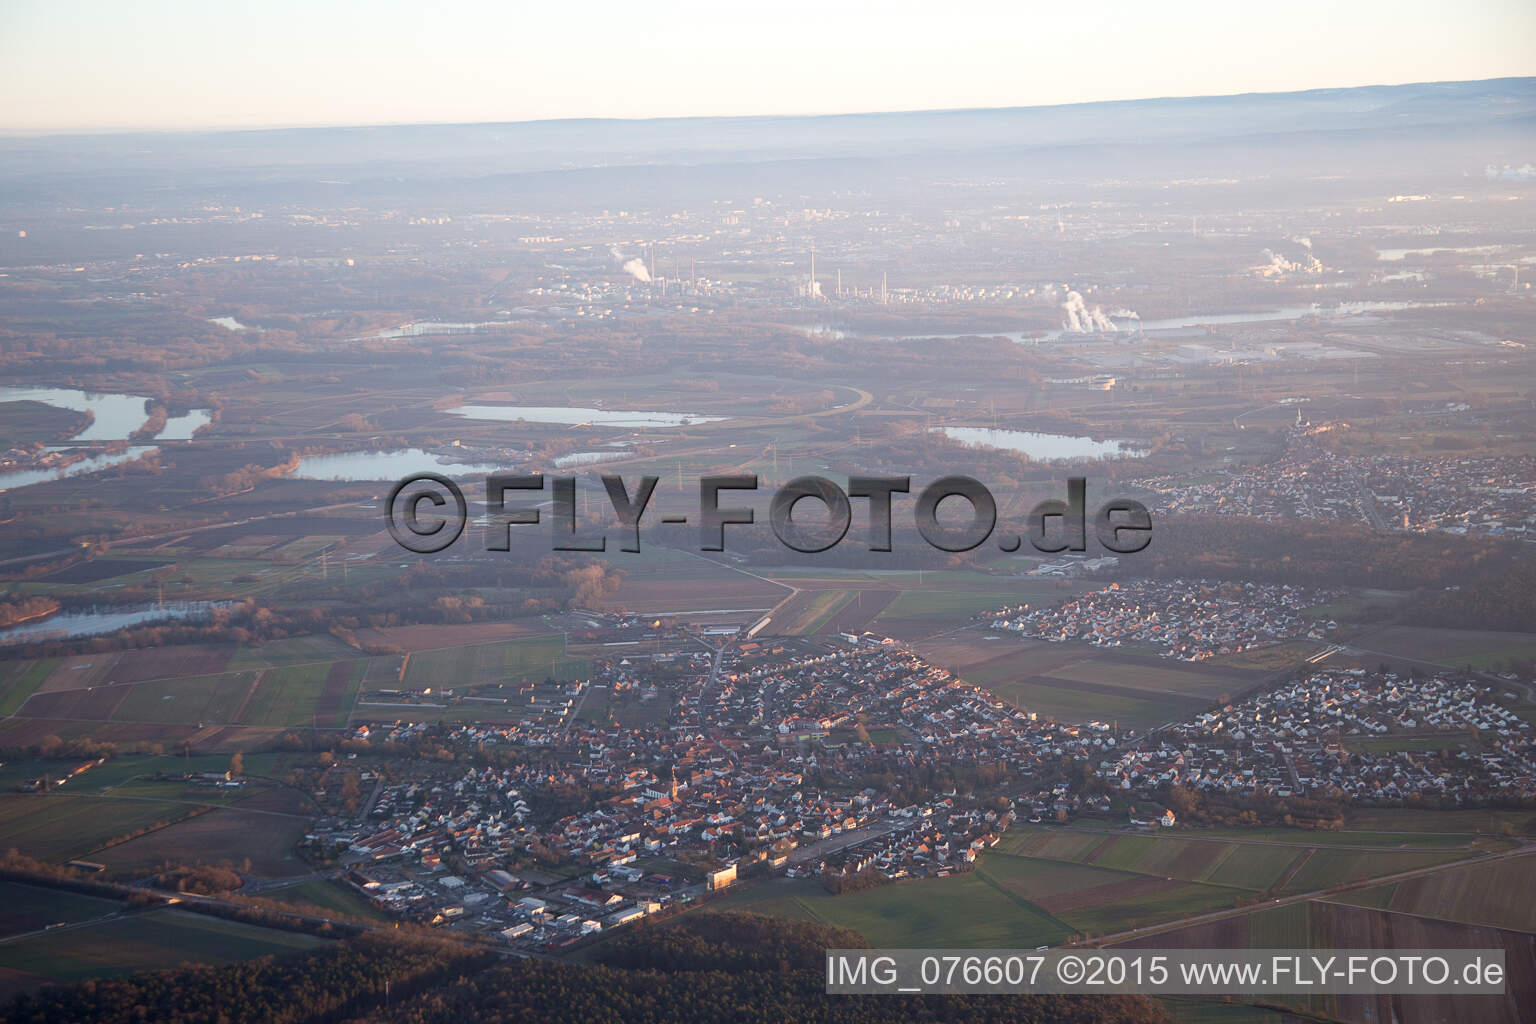 Rheinzabern in the state Rhineland-Palatinate, Germany from the drone perspective